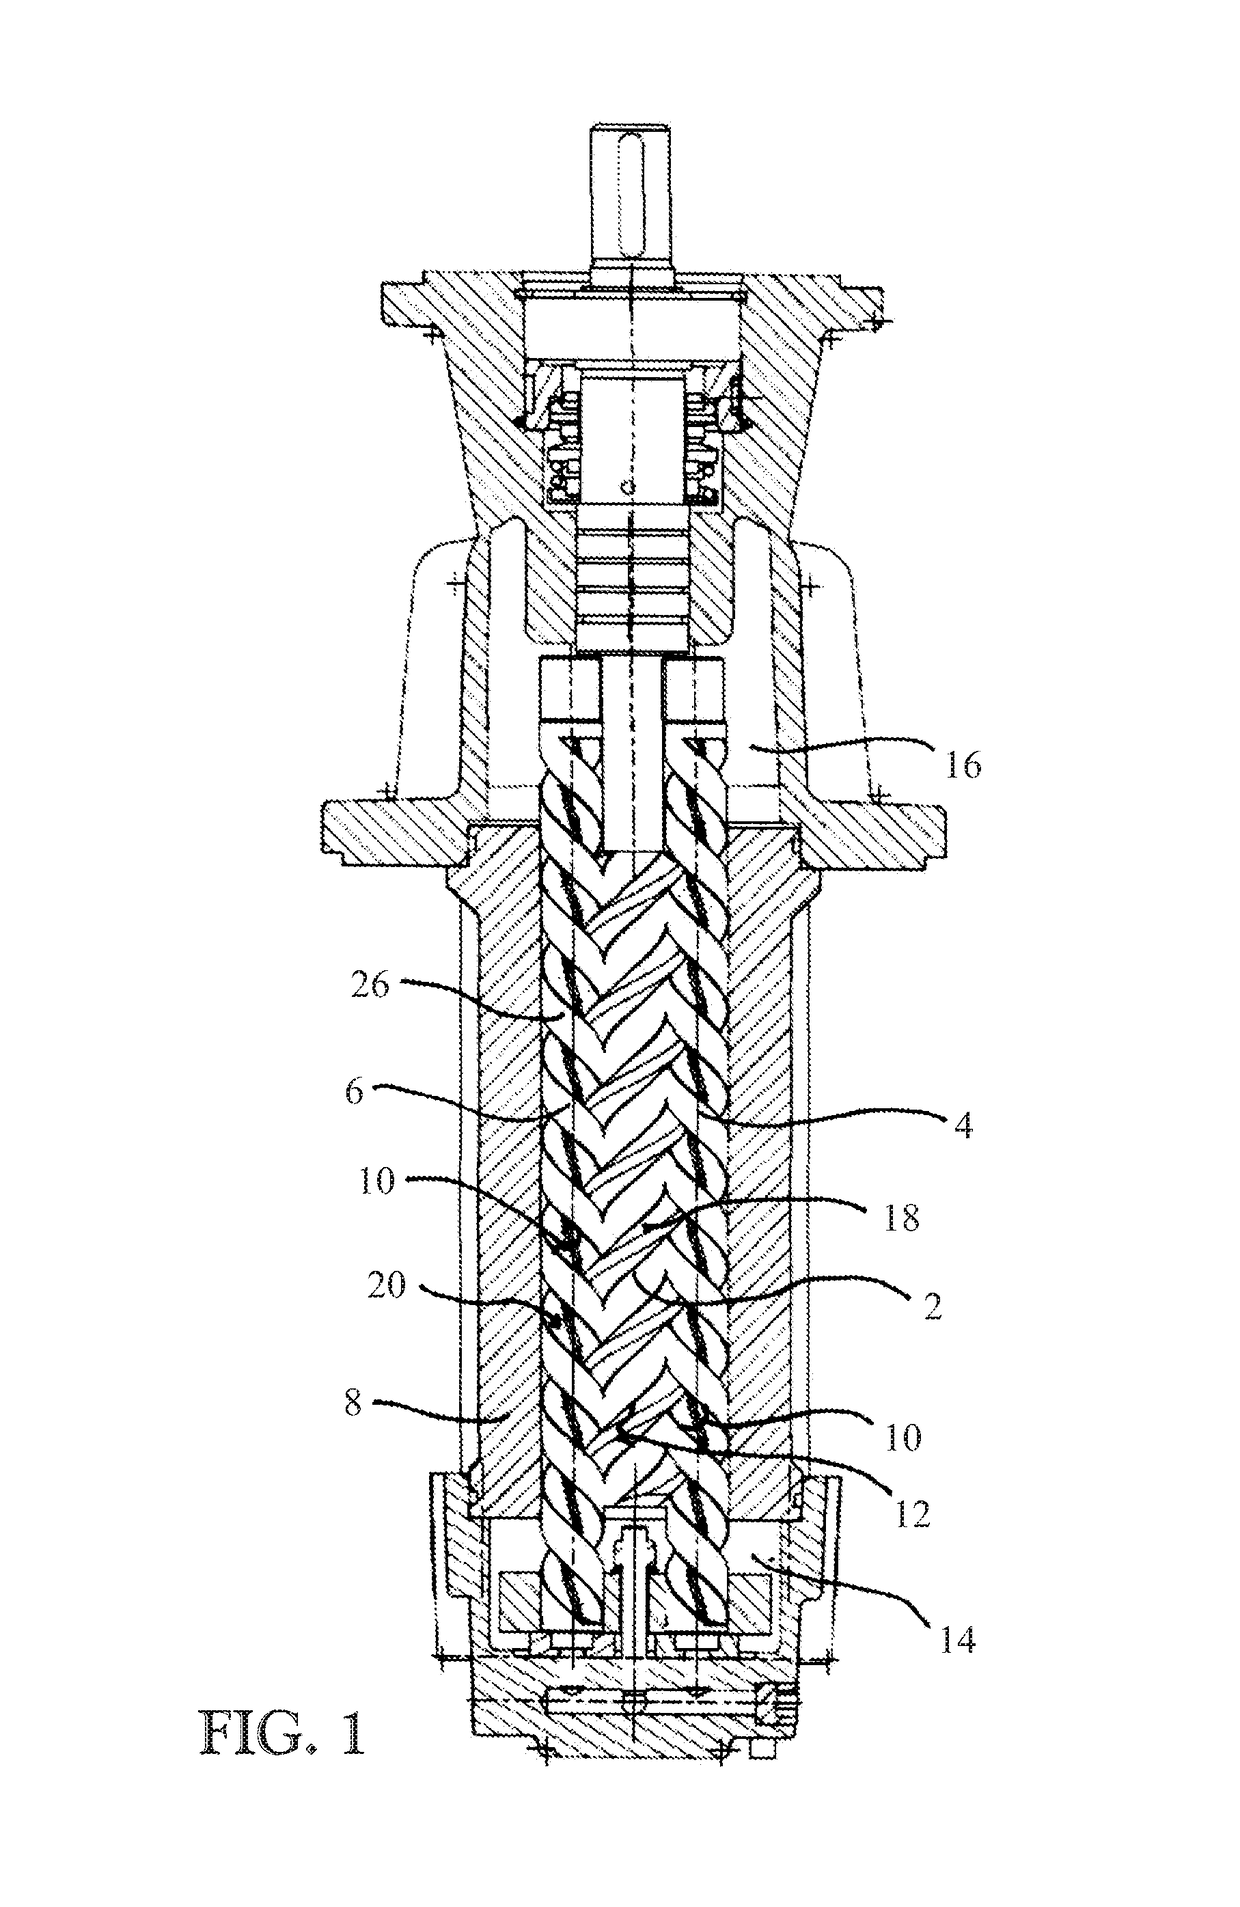 Method of manufacturing a screw pump without undercut and/or screw pump which can have lubrication channels on at least one of the drive screw and running screws